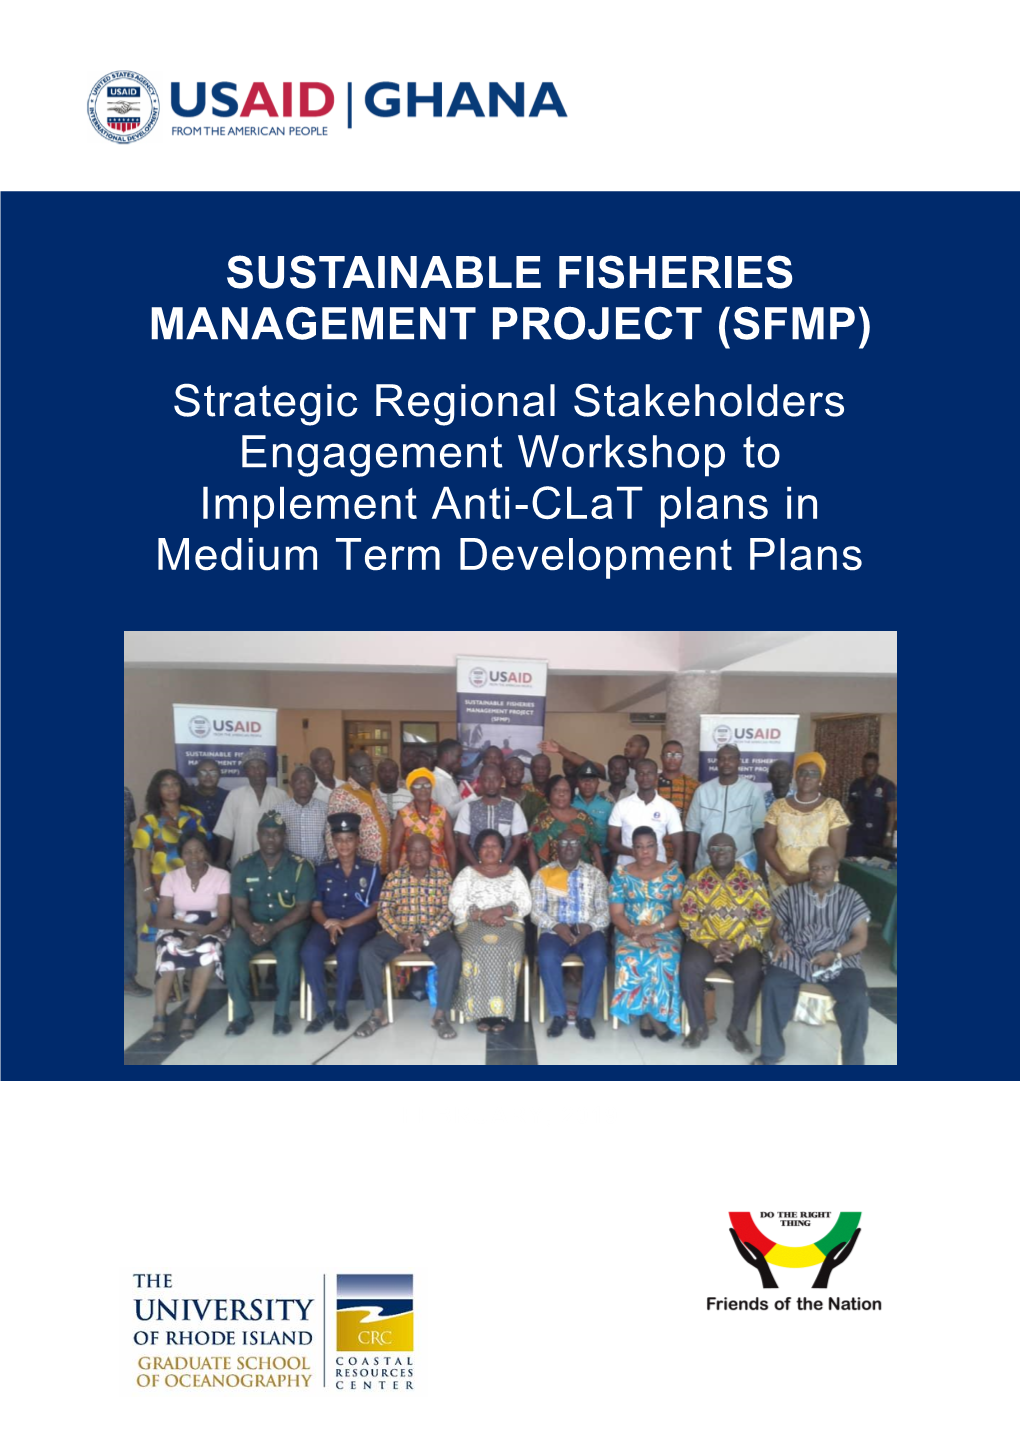 SUSTAINABLE FISHERIES MANAGEMENT PROJECT (SFMP) Strategic Regional Stakeholders Engagement Workshop to Implement Anti-Clat Plans in Medium Term Development Plans